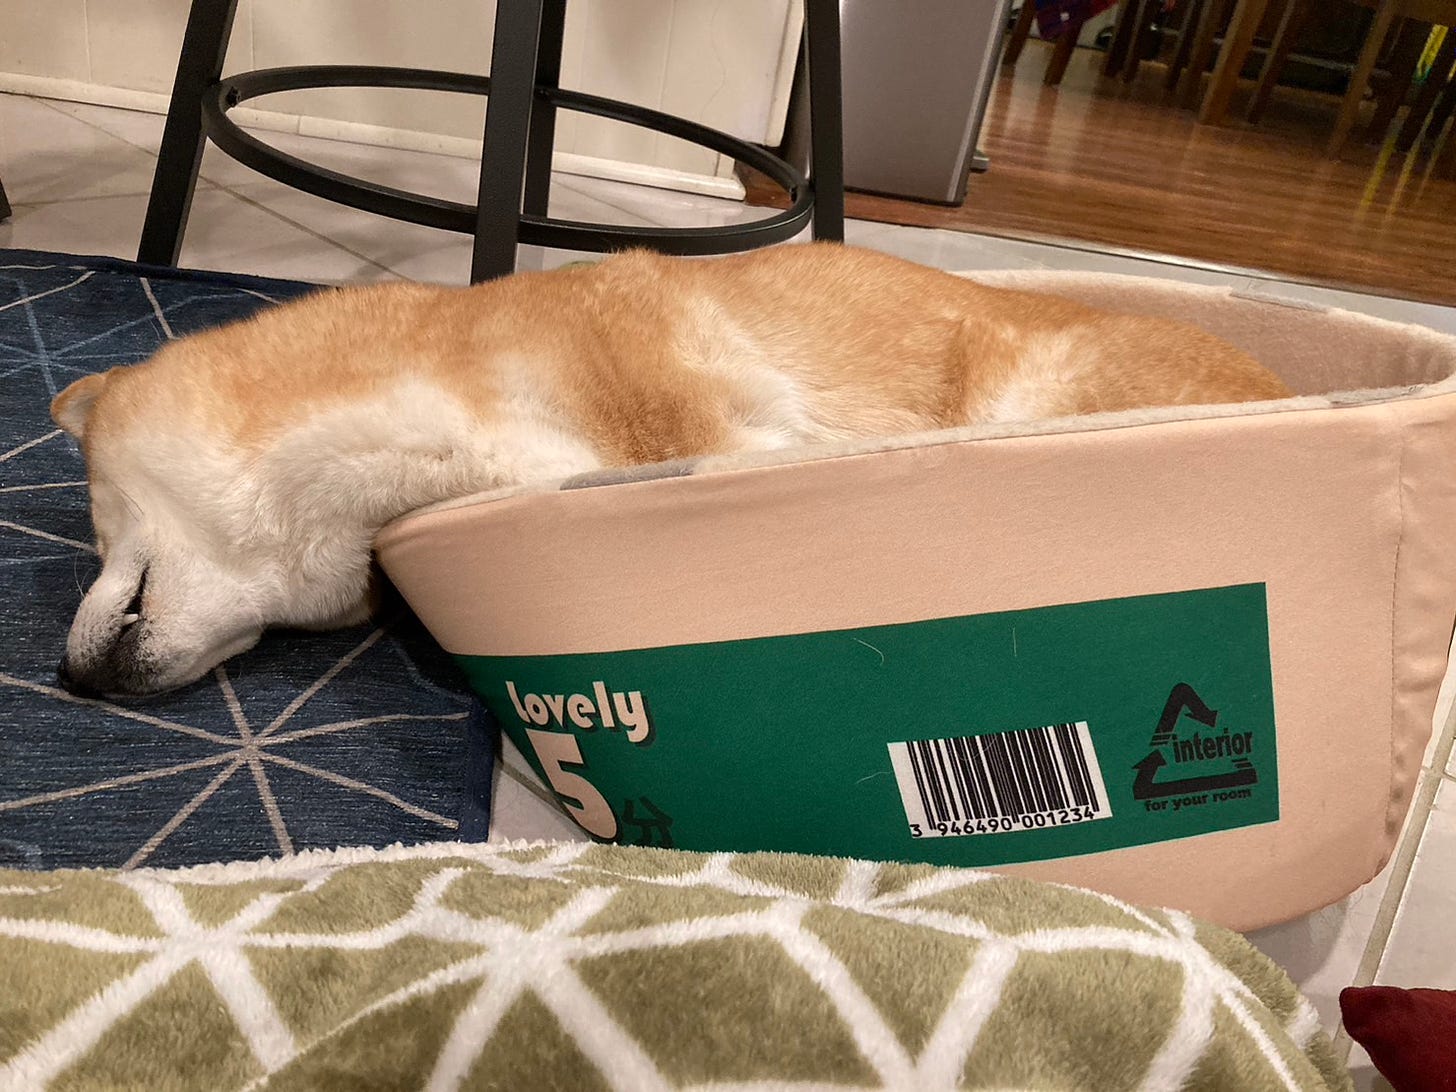 Charm, the shiba inu, spilling right out of her ramen-bowl shaped dog bed. She looks tired and done with life.